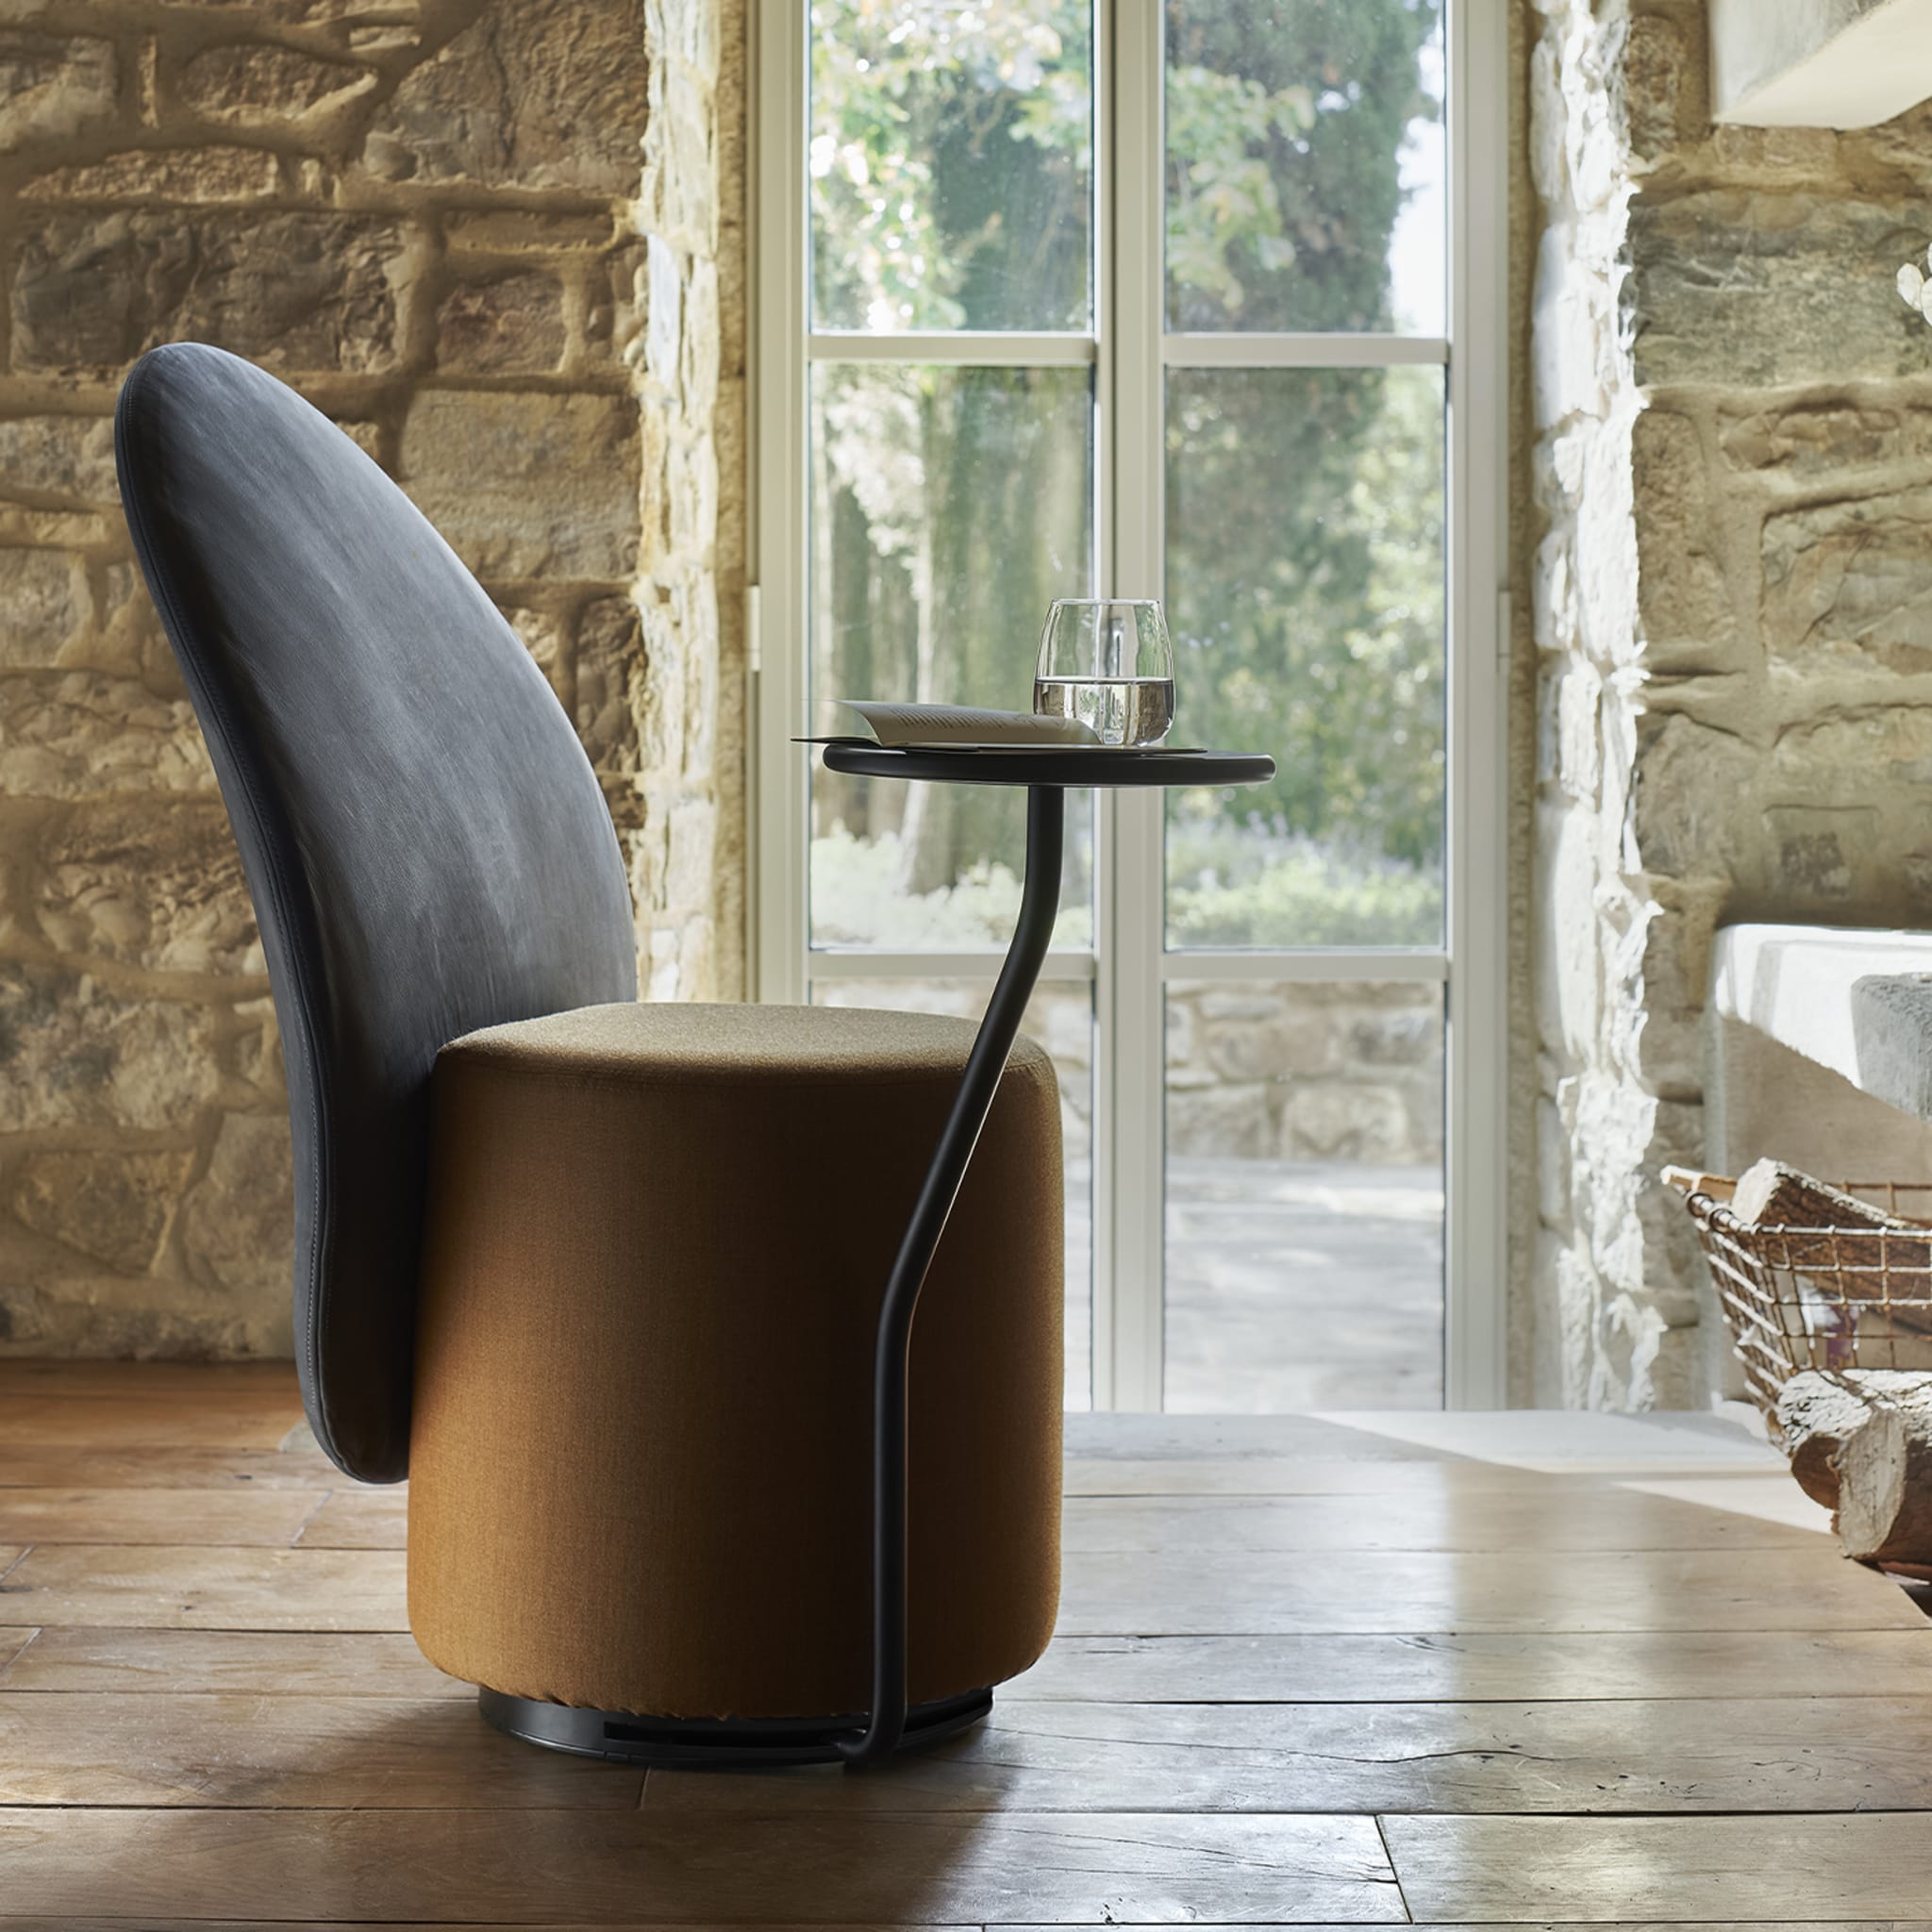 Loomi Black and Mustard Chair with Top by Lapo Ciatti - Alternative view 1